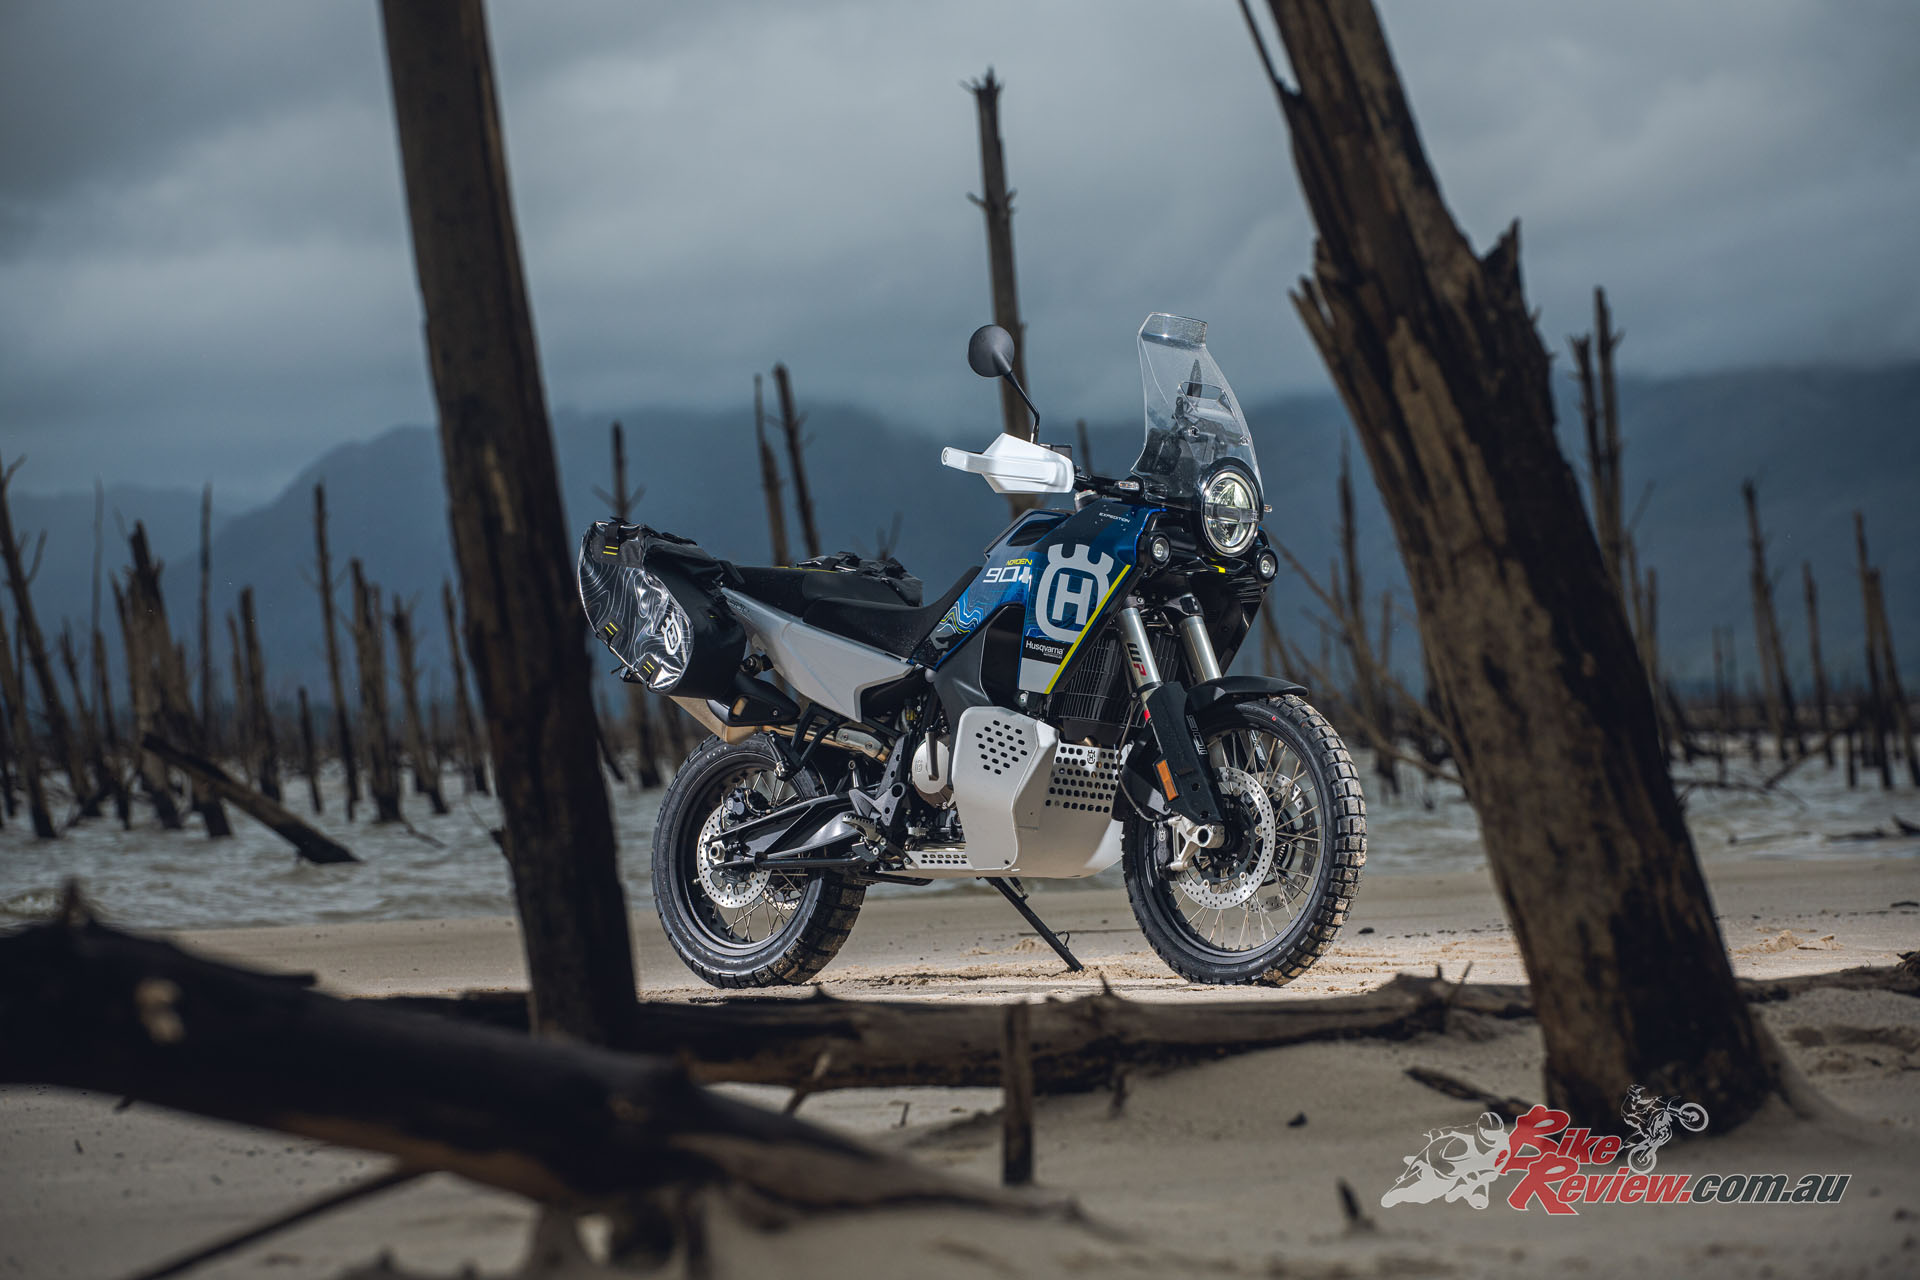 Adam jetted off to South Africa to check out the Husqvarna Norden 901 Expedition! Check out what he thought...